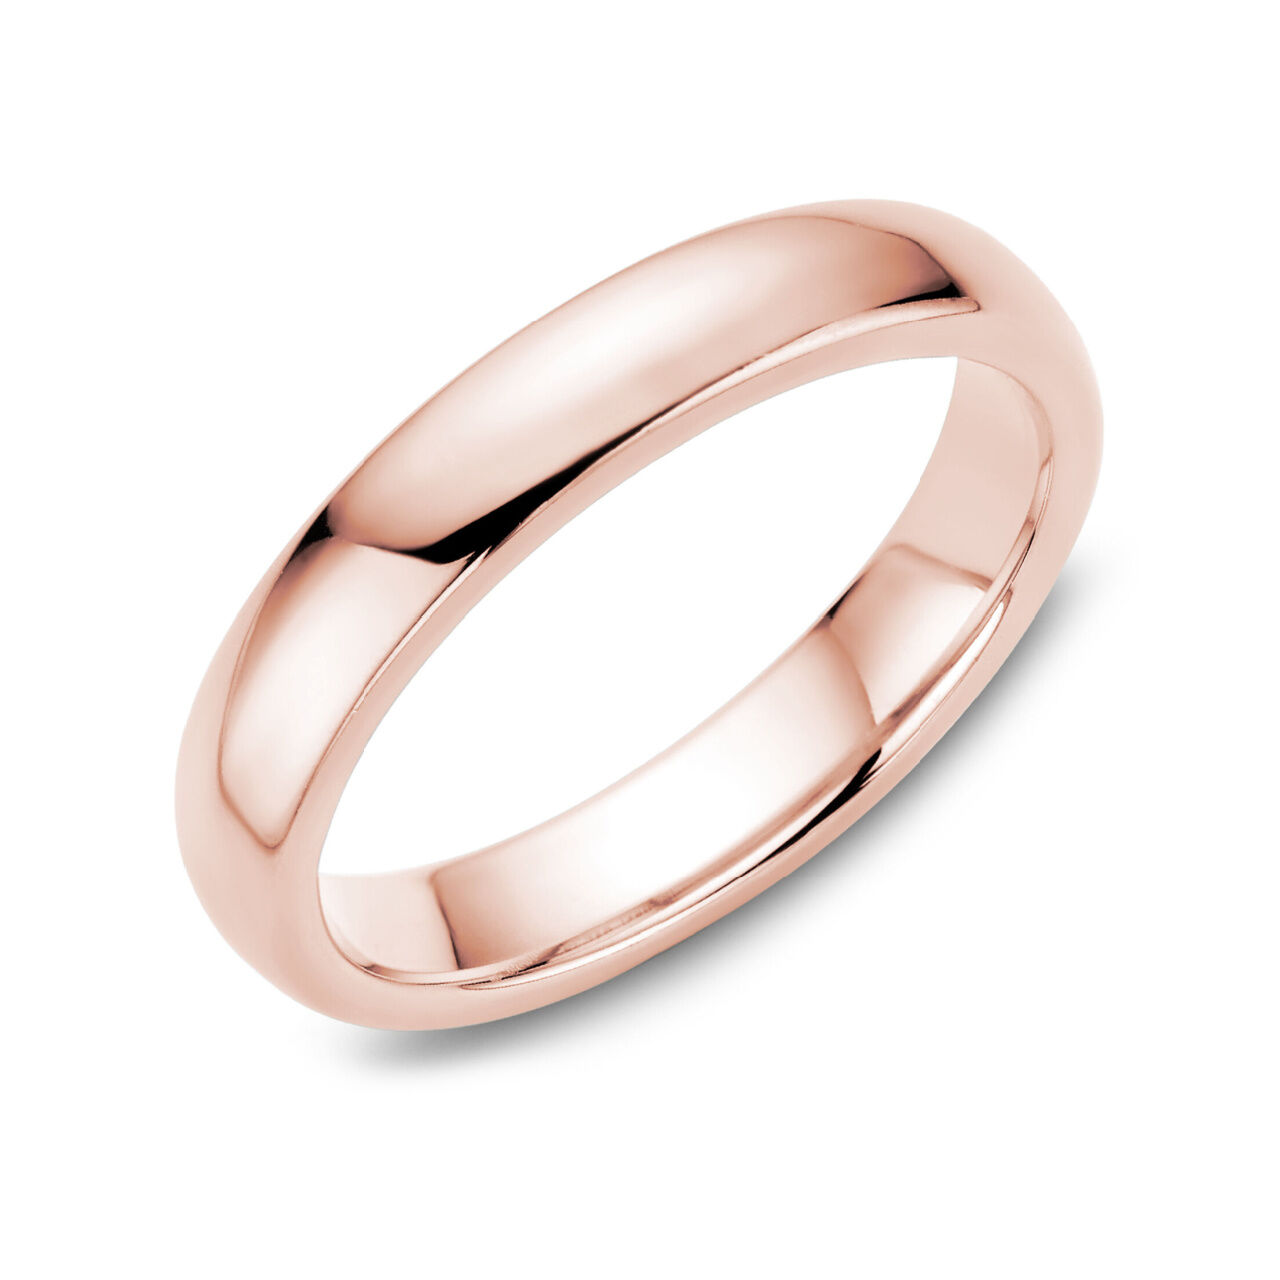 All Wedding Bands Collection | Maison Birks Canada